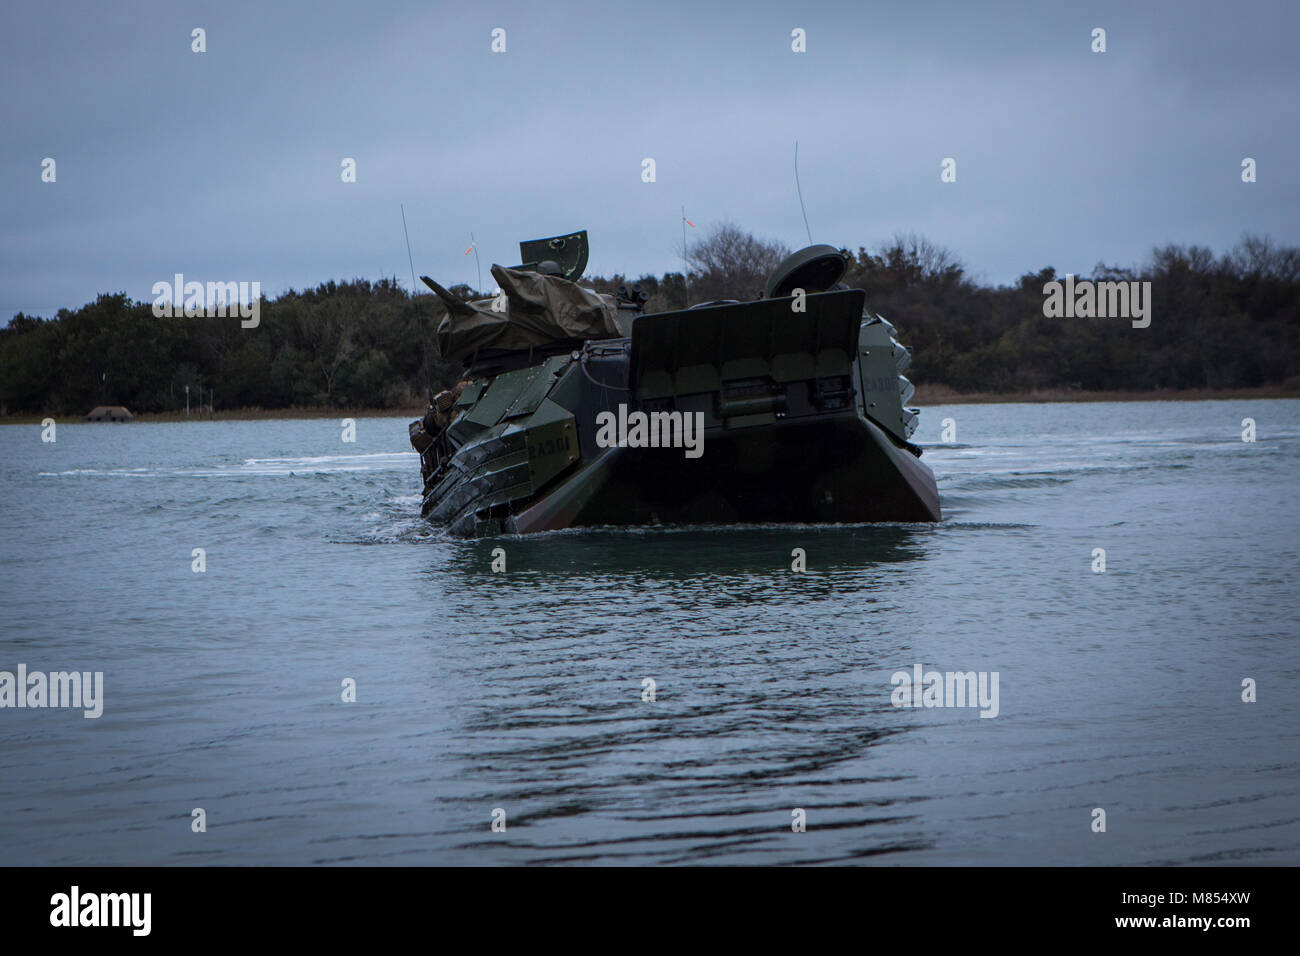 U.S. Marines with 2nd Assault Amphibian Battalion (2d AABN), 2nd Marine Division (2d MARDIV), conduct an amphibious movement aboard an AAV-7A1 Assault Amphibious Vehicle during the unit's Marine Corps Combat Readiness Evaluation (MCCRE) on Camp Lejeune, N.C., March 12, 2018. The MCCRE is a pre-deployment training evaluation designed to test the skills of Marines and Sailors with possible combat scenarios. (U.S. Marine Corps photo by Lance Cpl. Christian J. Robertson) Stock Photo